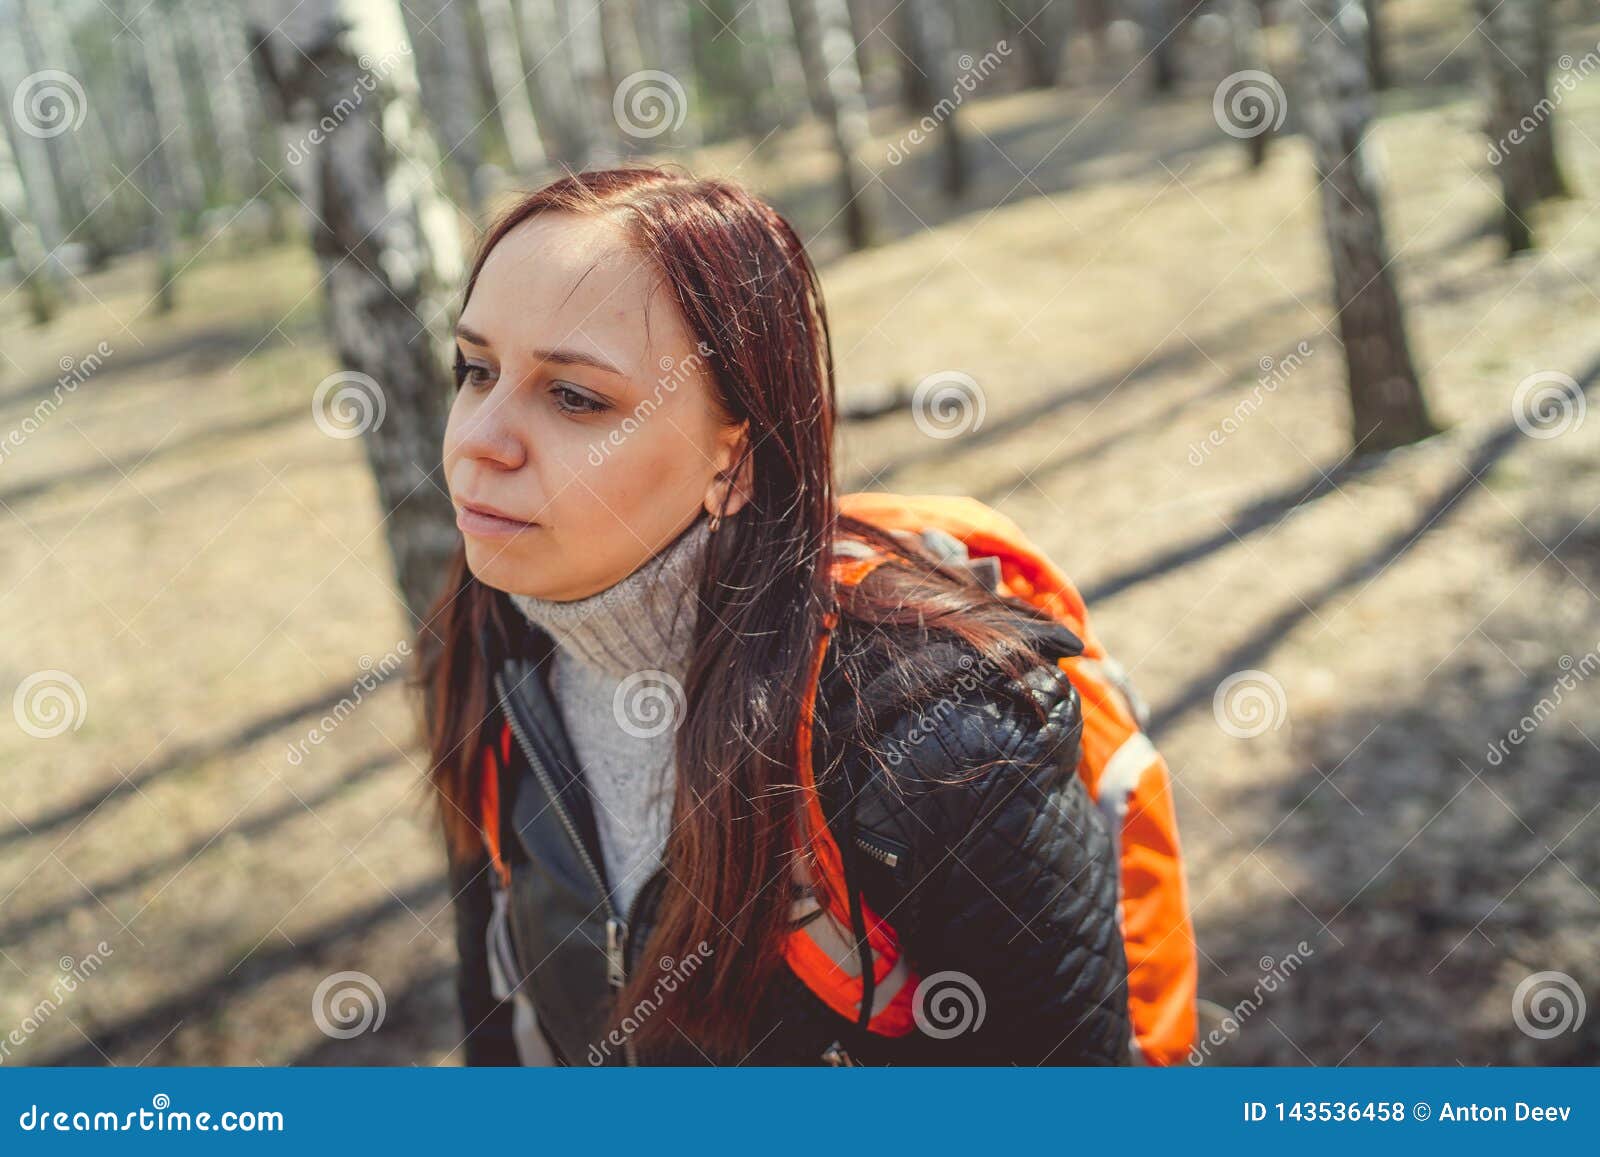 Woman with Backpack Walking in Woods Side View of Casual Woman Carrying ...